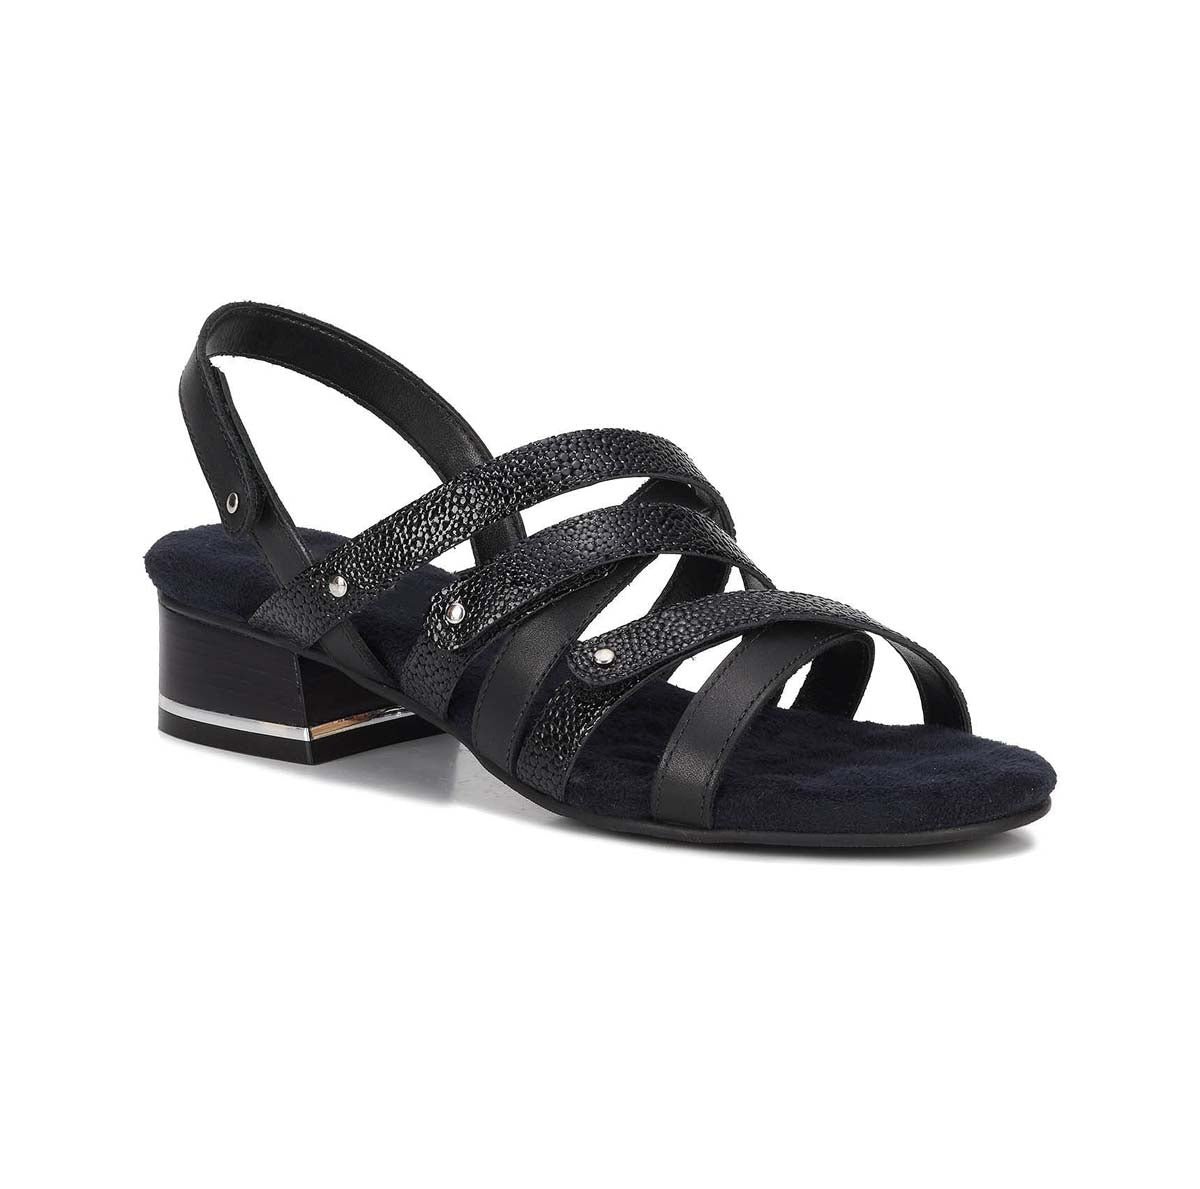 ROS HOMMERSON BREEZE WOMEN'S HOOK AND LOOP CLOSURE STRAPS SANDAL IN BLACK - TLW Shoes